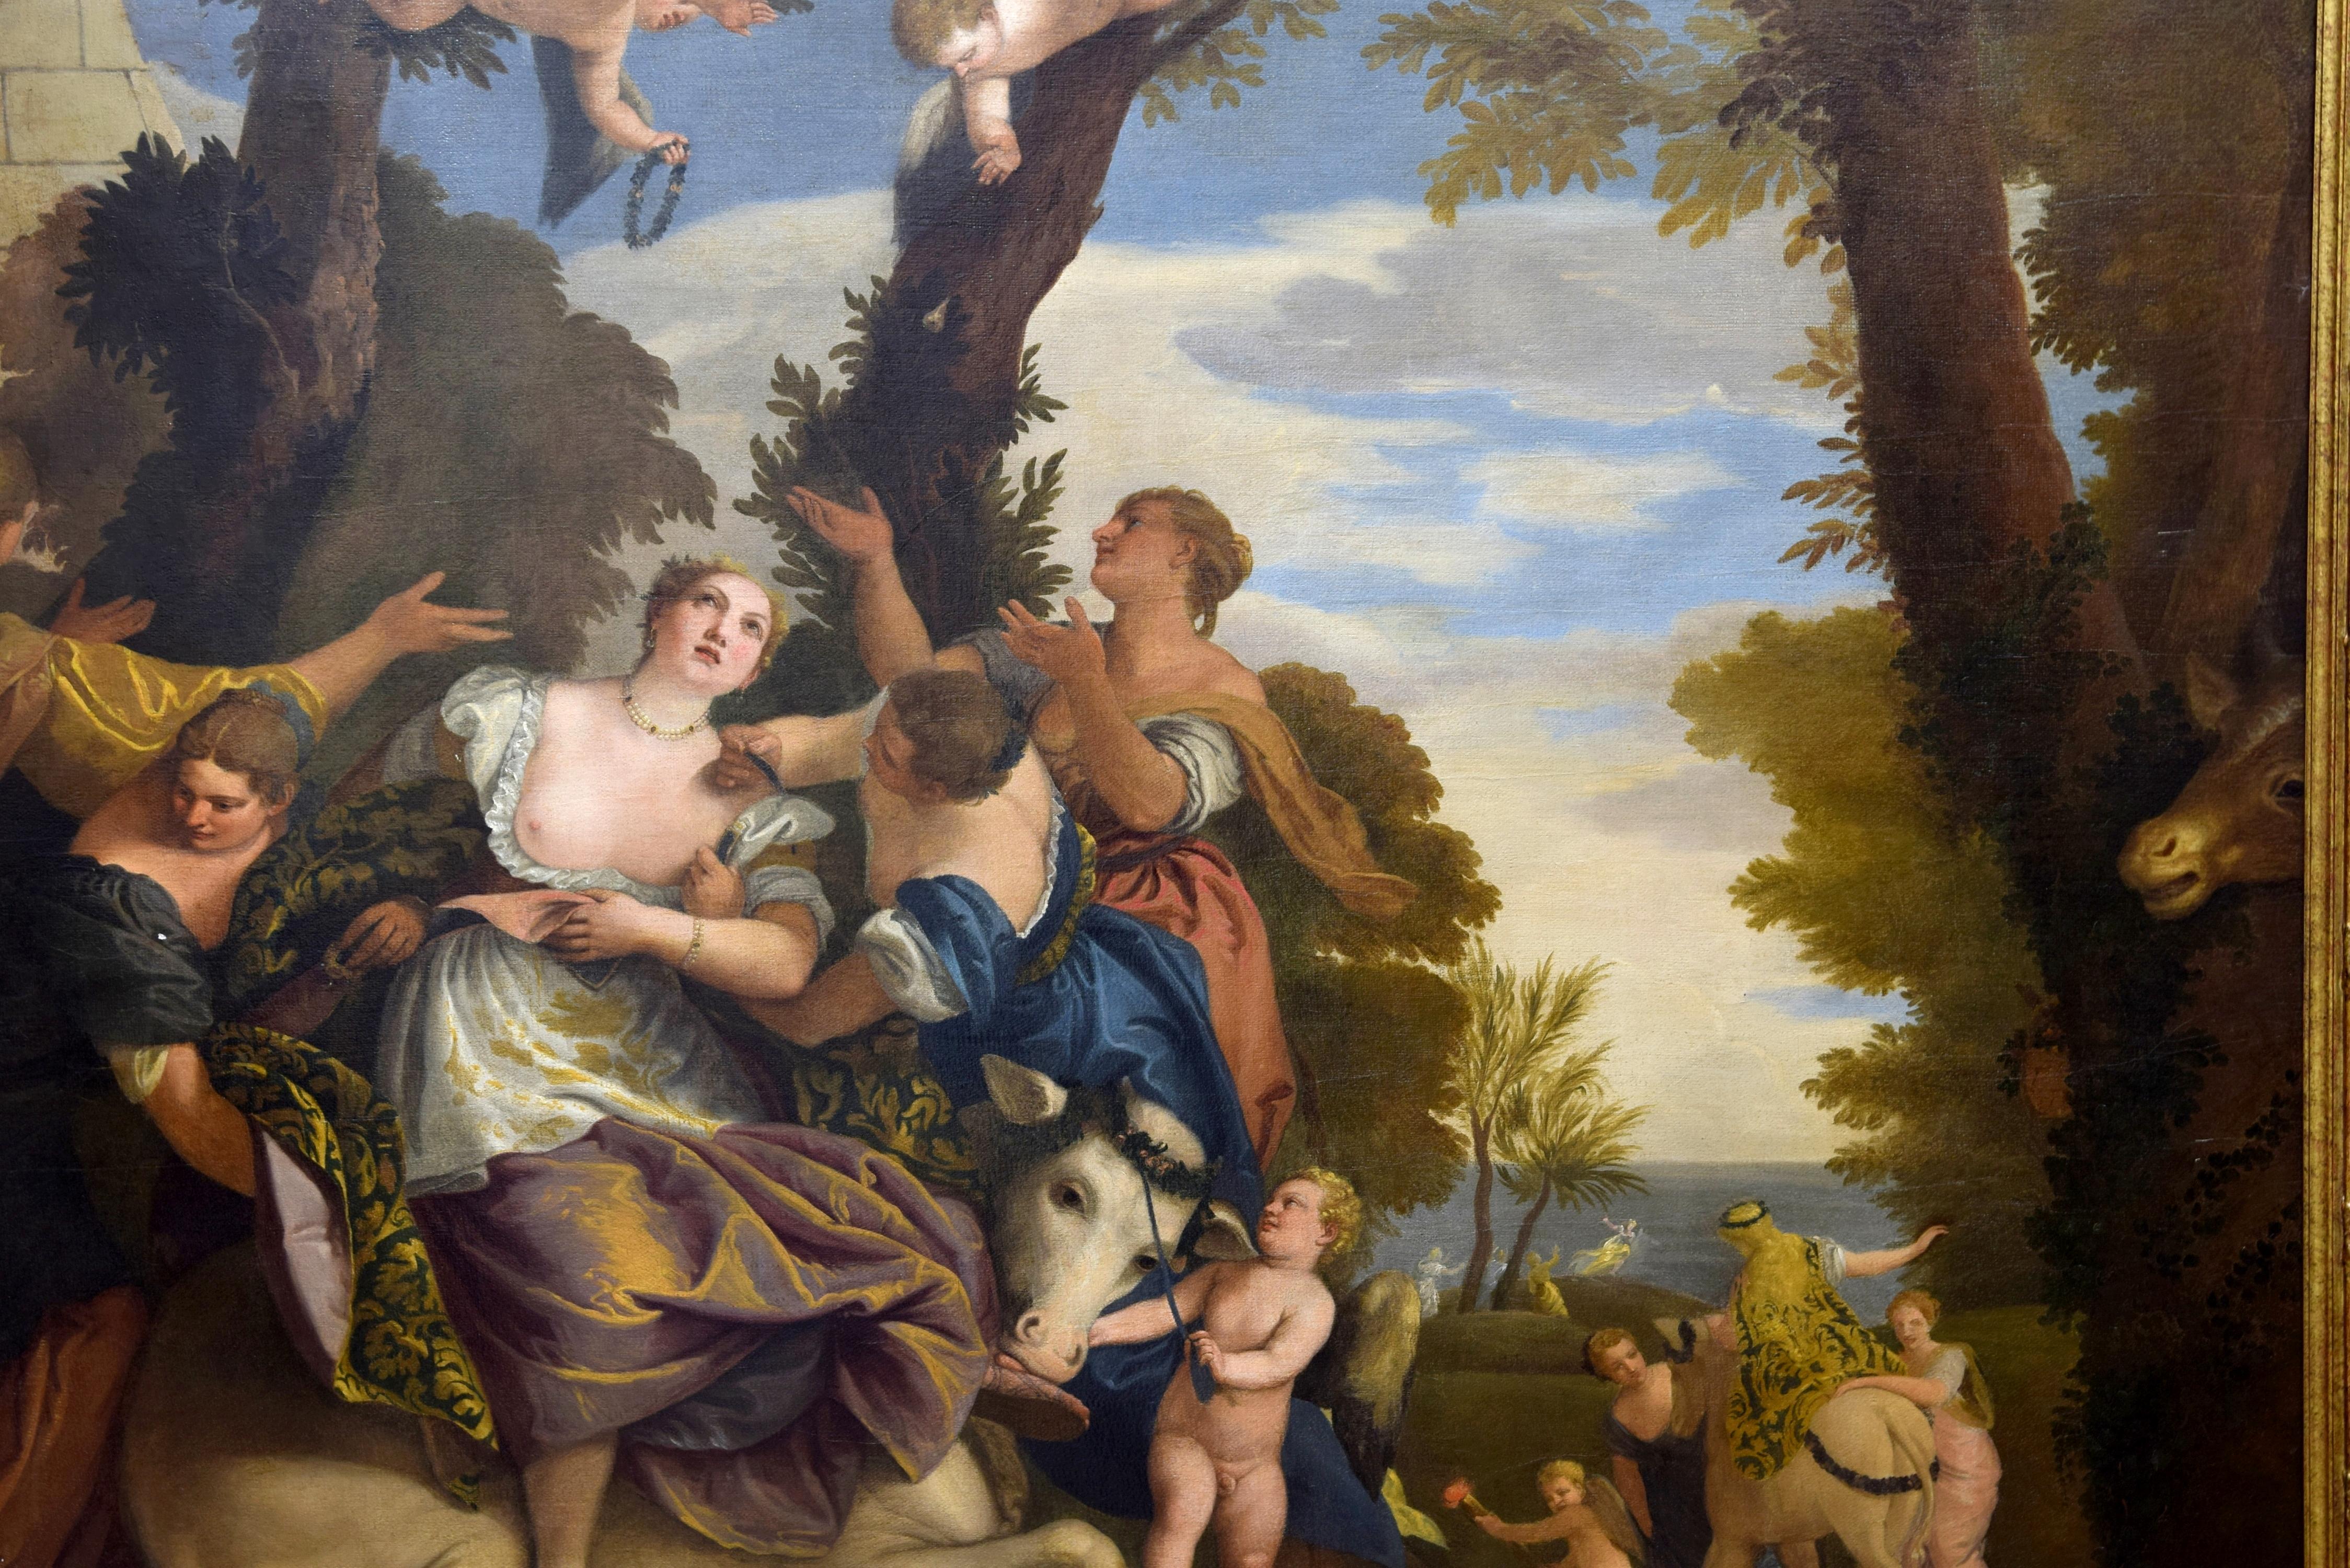 Rapture of Europe Oil on canvas. 17th century, following the model of VERONESE, Paolo Caliari (Verona, 1528-Venice, 1588).
 Oil on canvas showing a scene from classical mythology set in a natural landscape with leafy trees and a pyramid-shaped